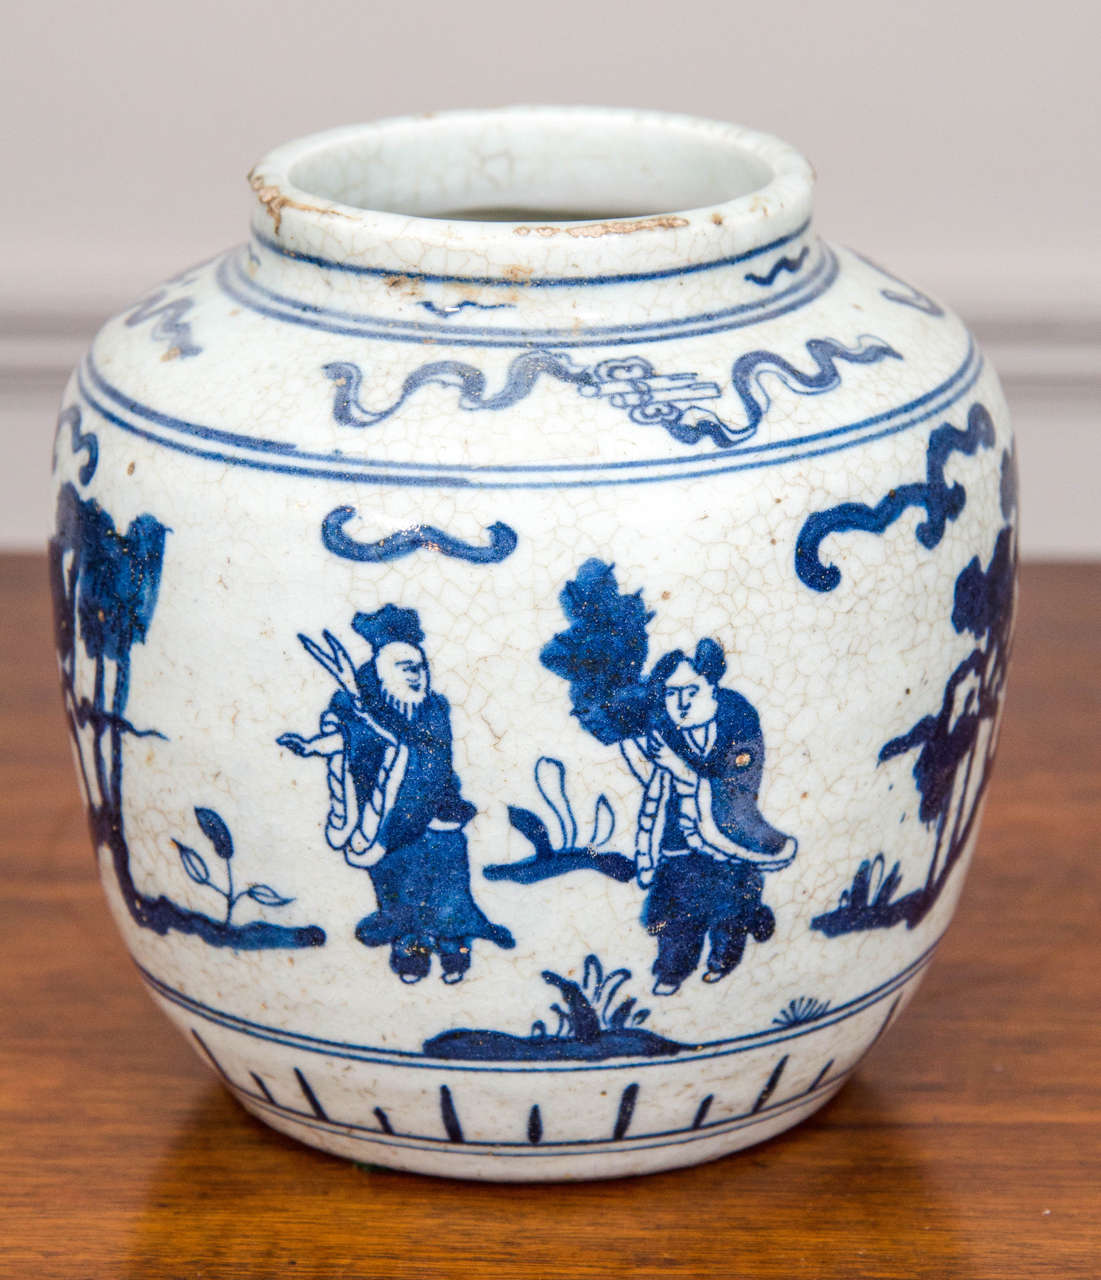 This single early 20th-century Chinese blue-and-white porcelain jar is ornamented in cobalt blue with figures in an abstracted landscape.